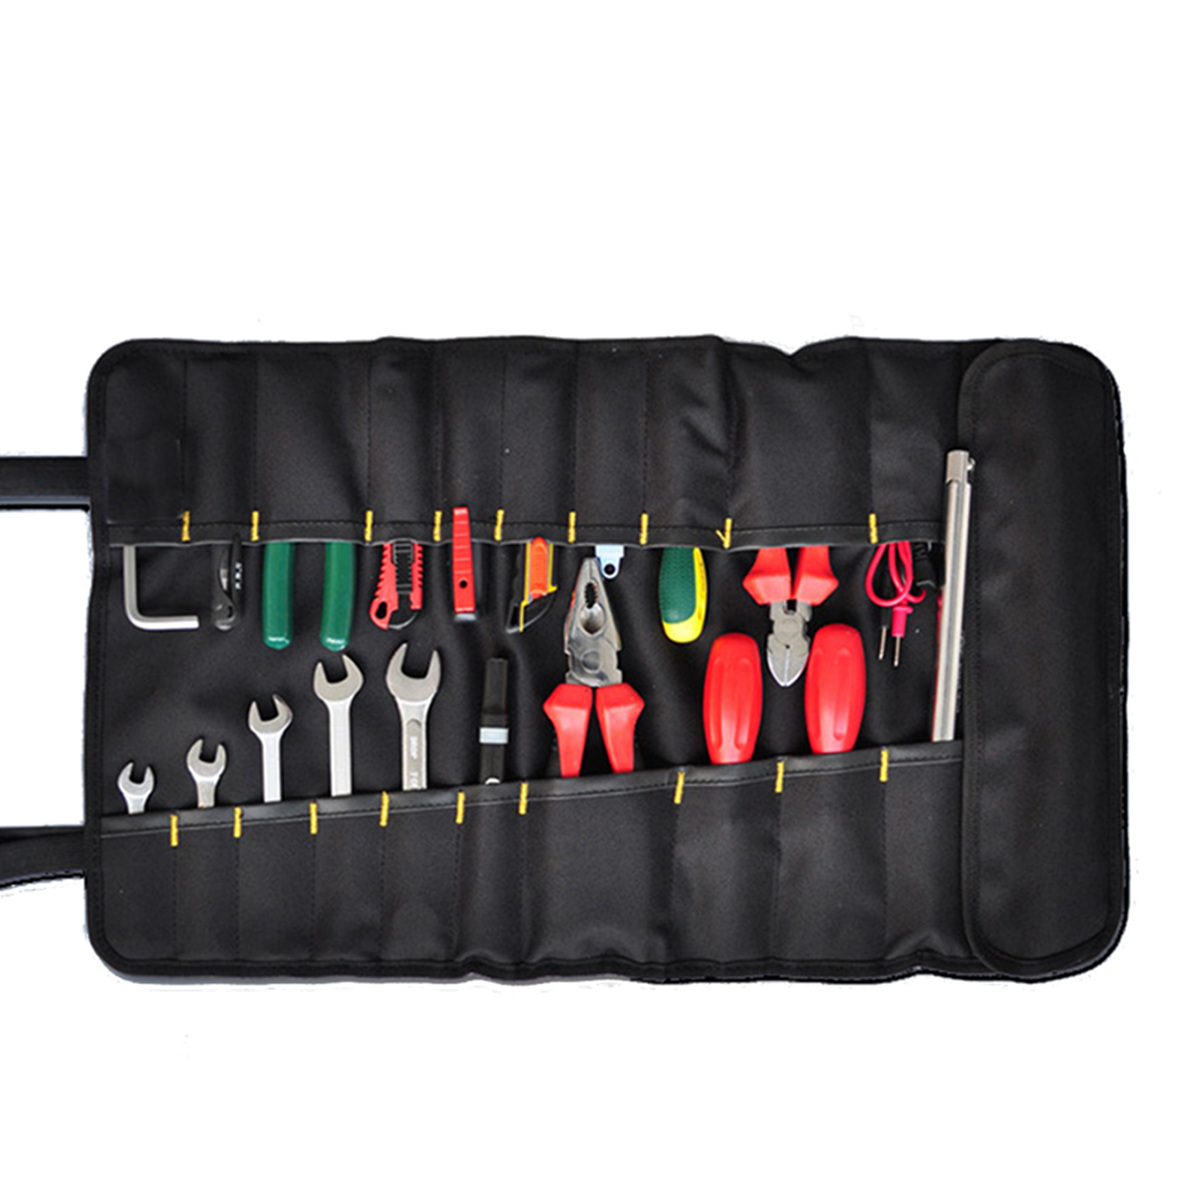 22-Pockets-Hardware-Tools-Roll-Case-Bag-Plier-Screwdriver-Spanner-Pouch-Tools-Kit-1176985-7